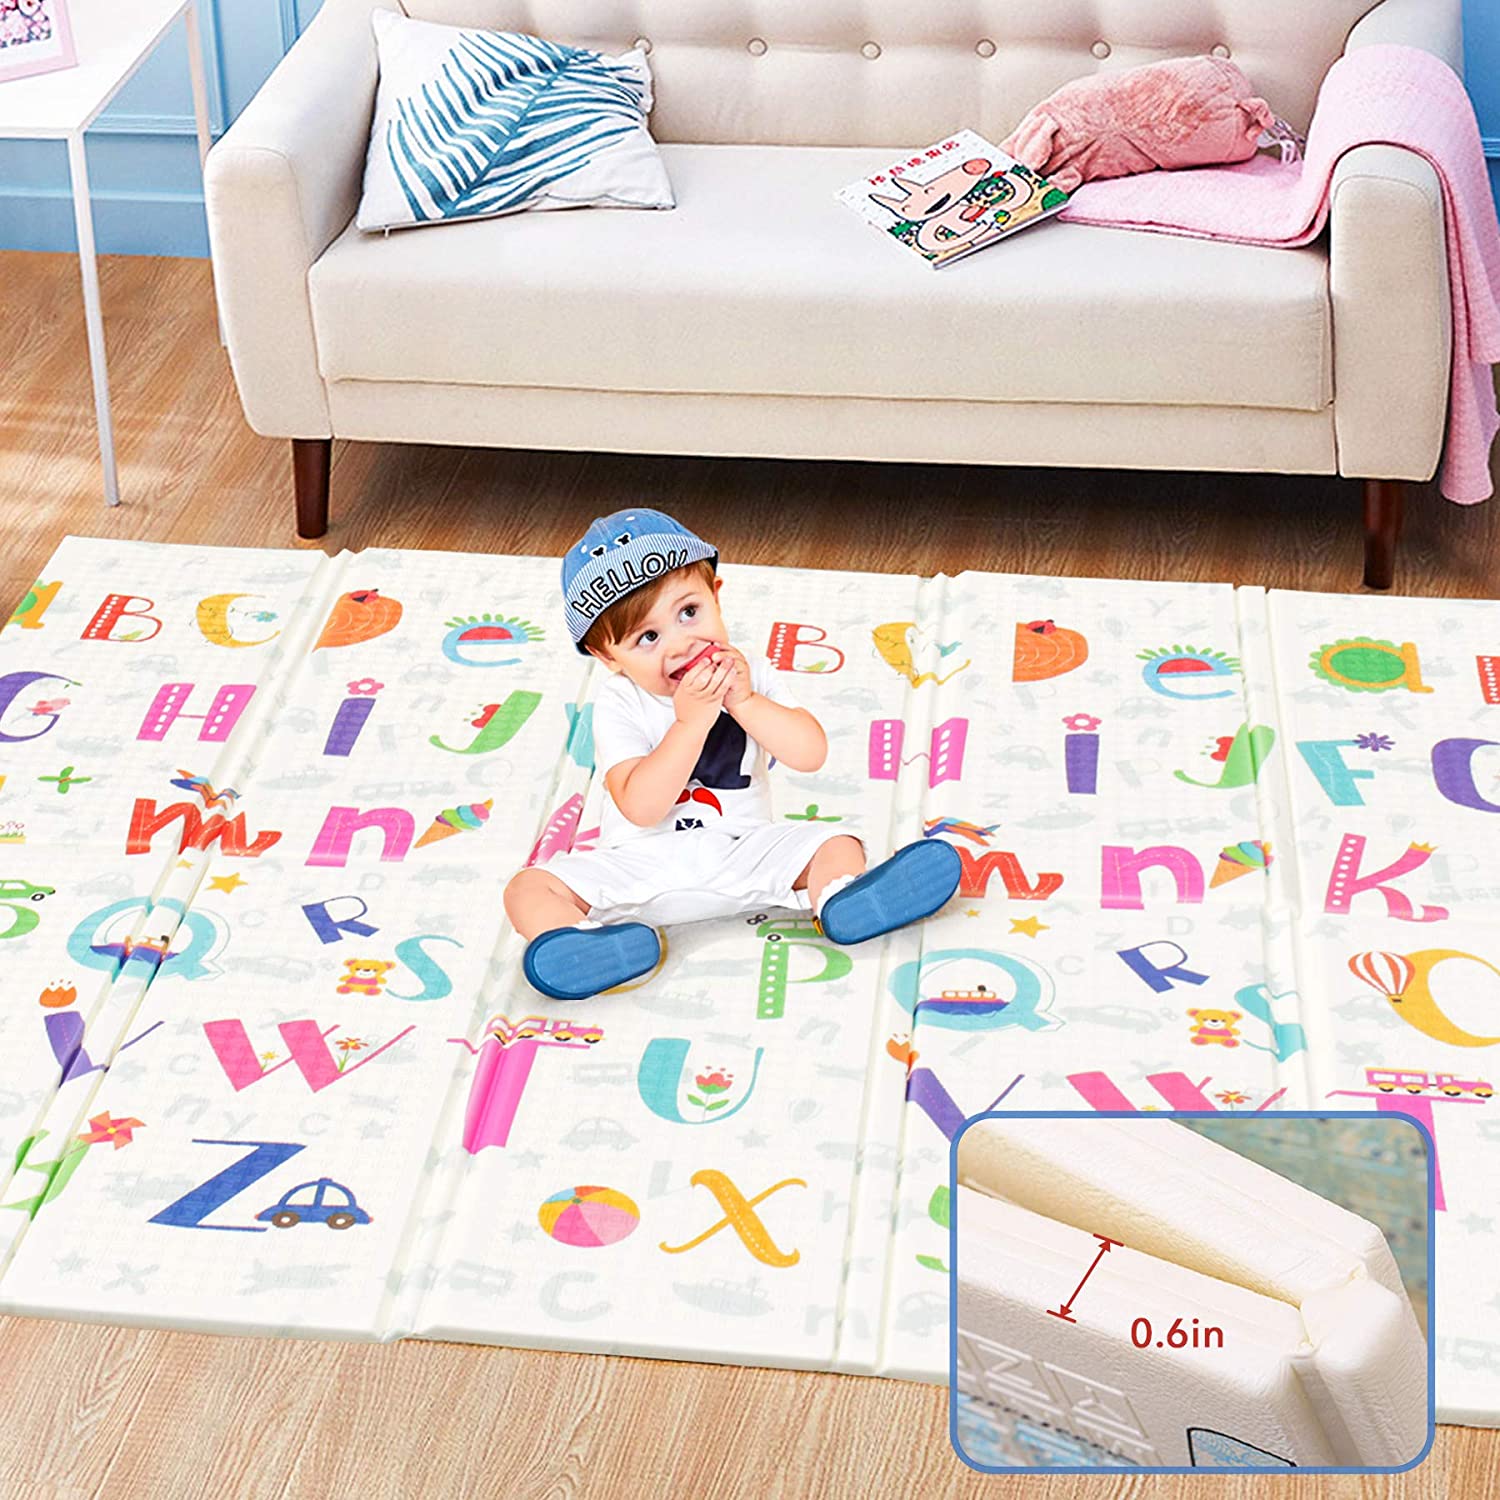 Wholesale Price China Baby Garden Playpen - Foldable Baby Play Mat 0.6 Inch Thick Waterproof Baby Crawling Mat 79” x 71” Extra Large Play Mats for Babies Reversible Multifunctional Mats (Letter) &...